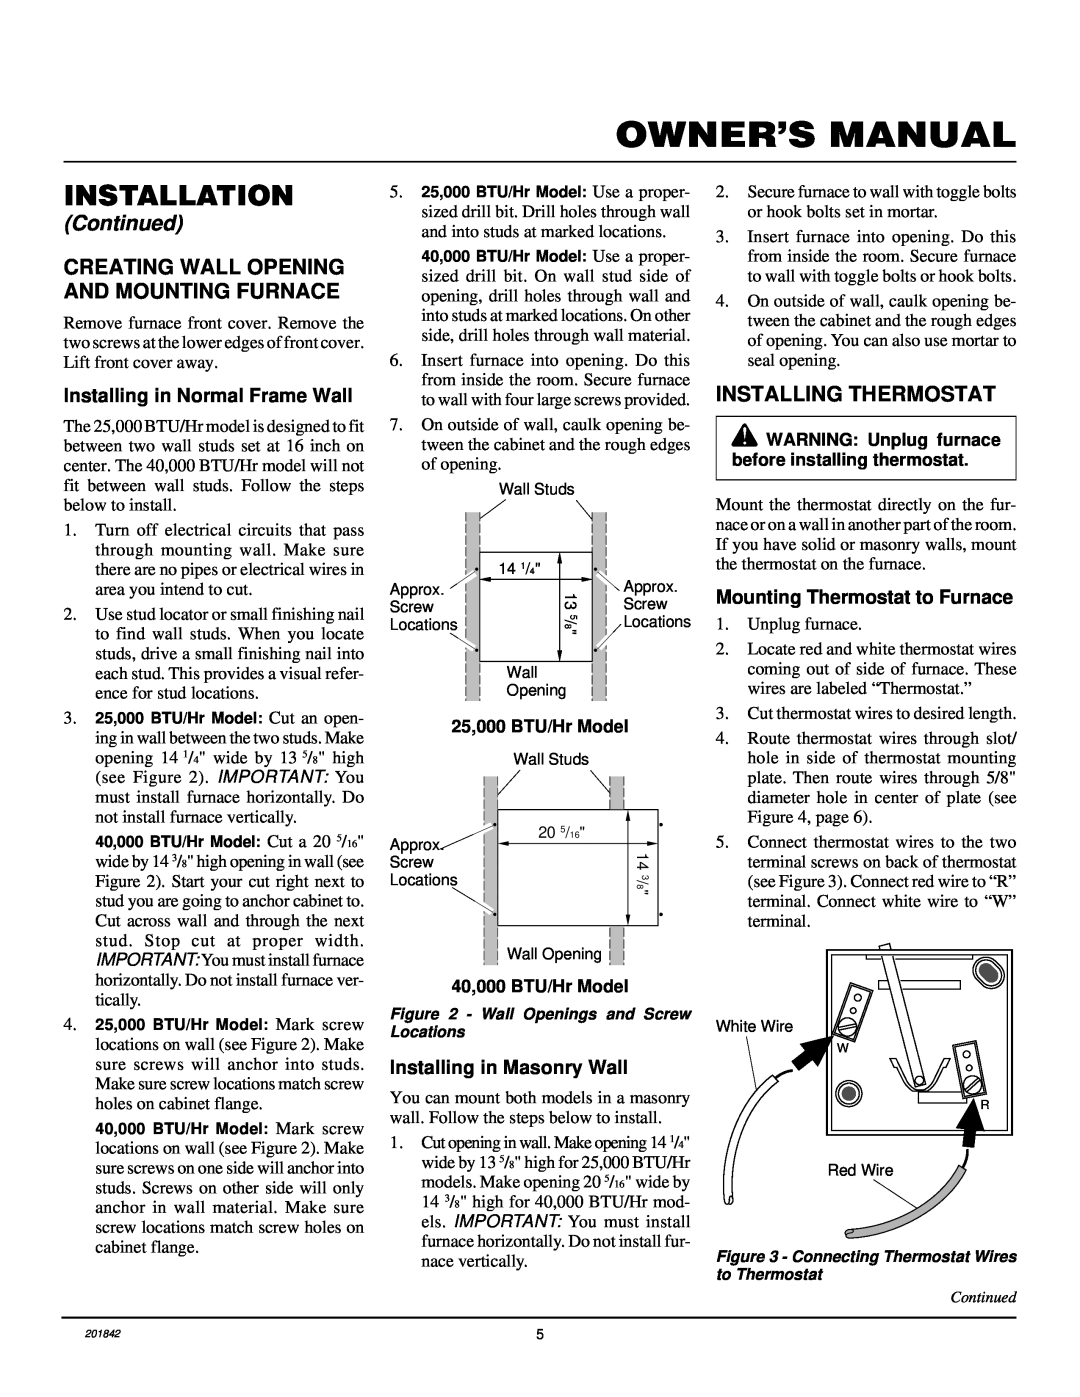 Williams 4003532, 2503532 Continued, Owner’S Manual, Installation, Creating Wall Opening And Mounting Furnace 